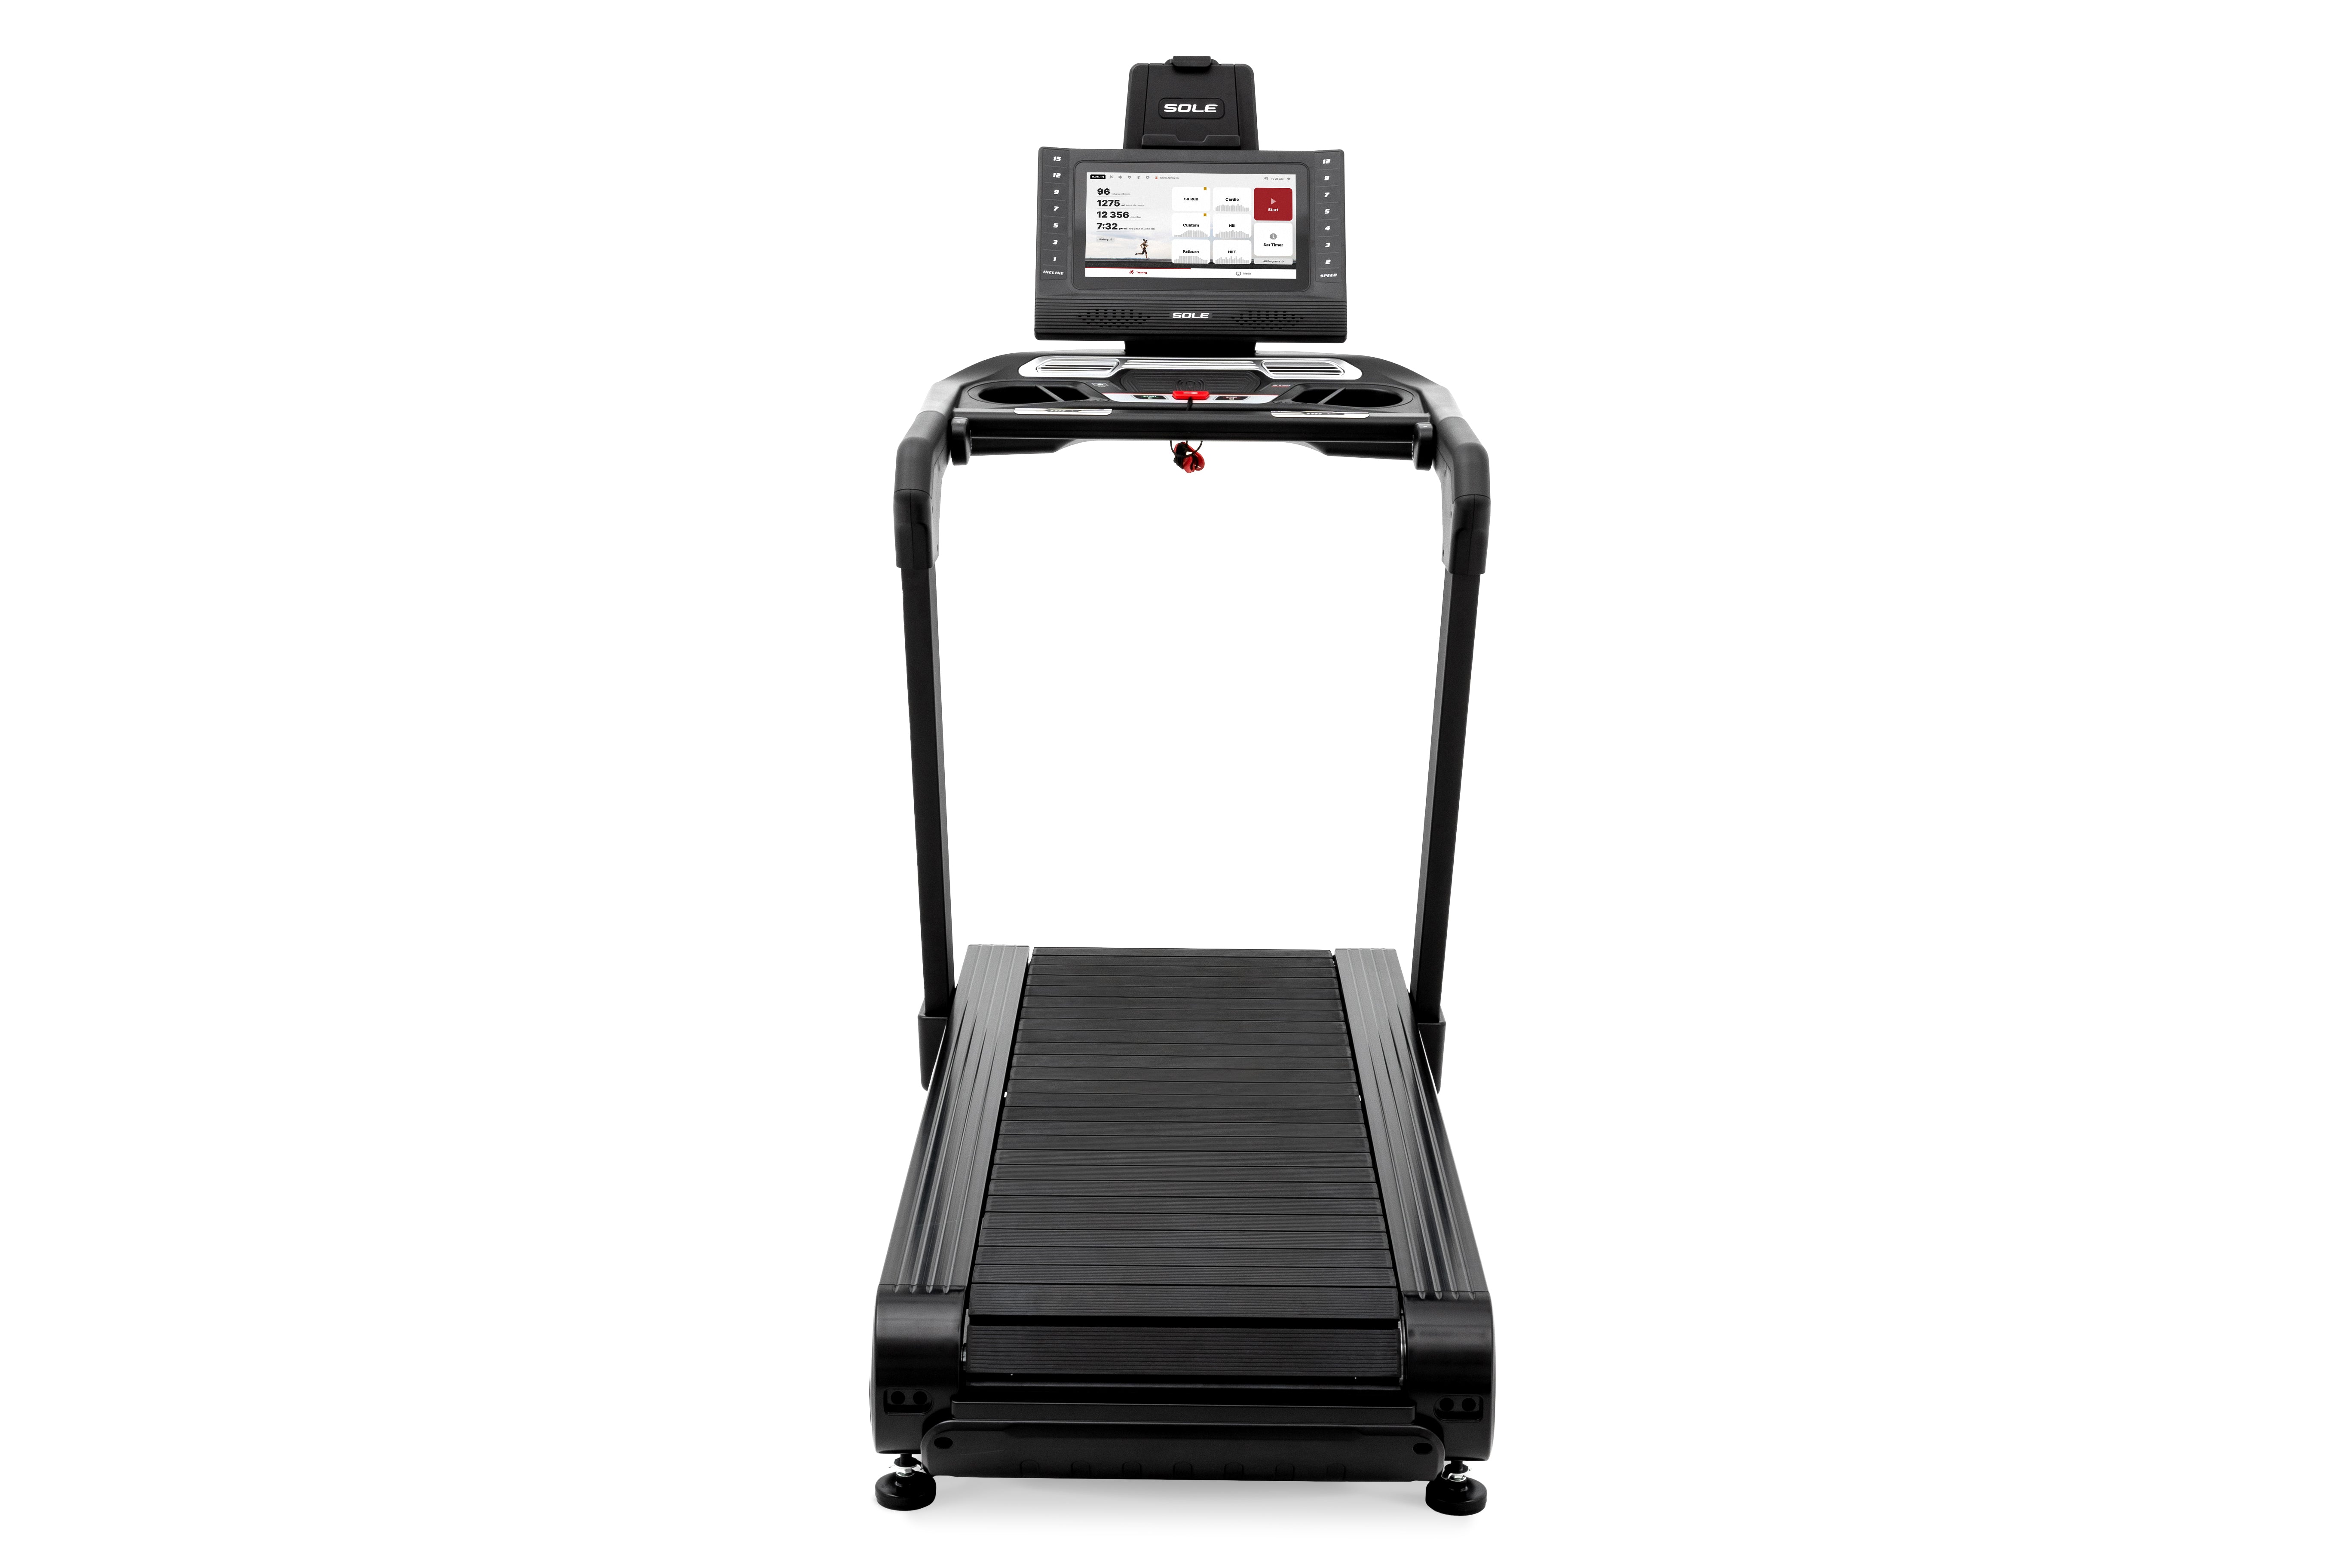 Front view of the Sole ST90 treadmill showcasing its digital touchscreen display with workout metrics, sleek handlebars, and textured running deck against a white background.